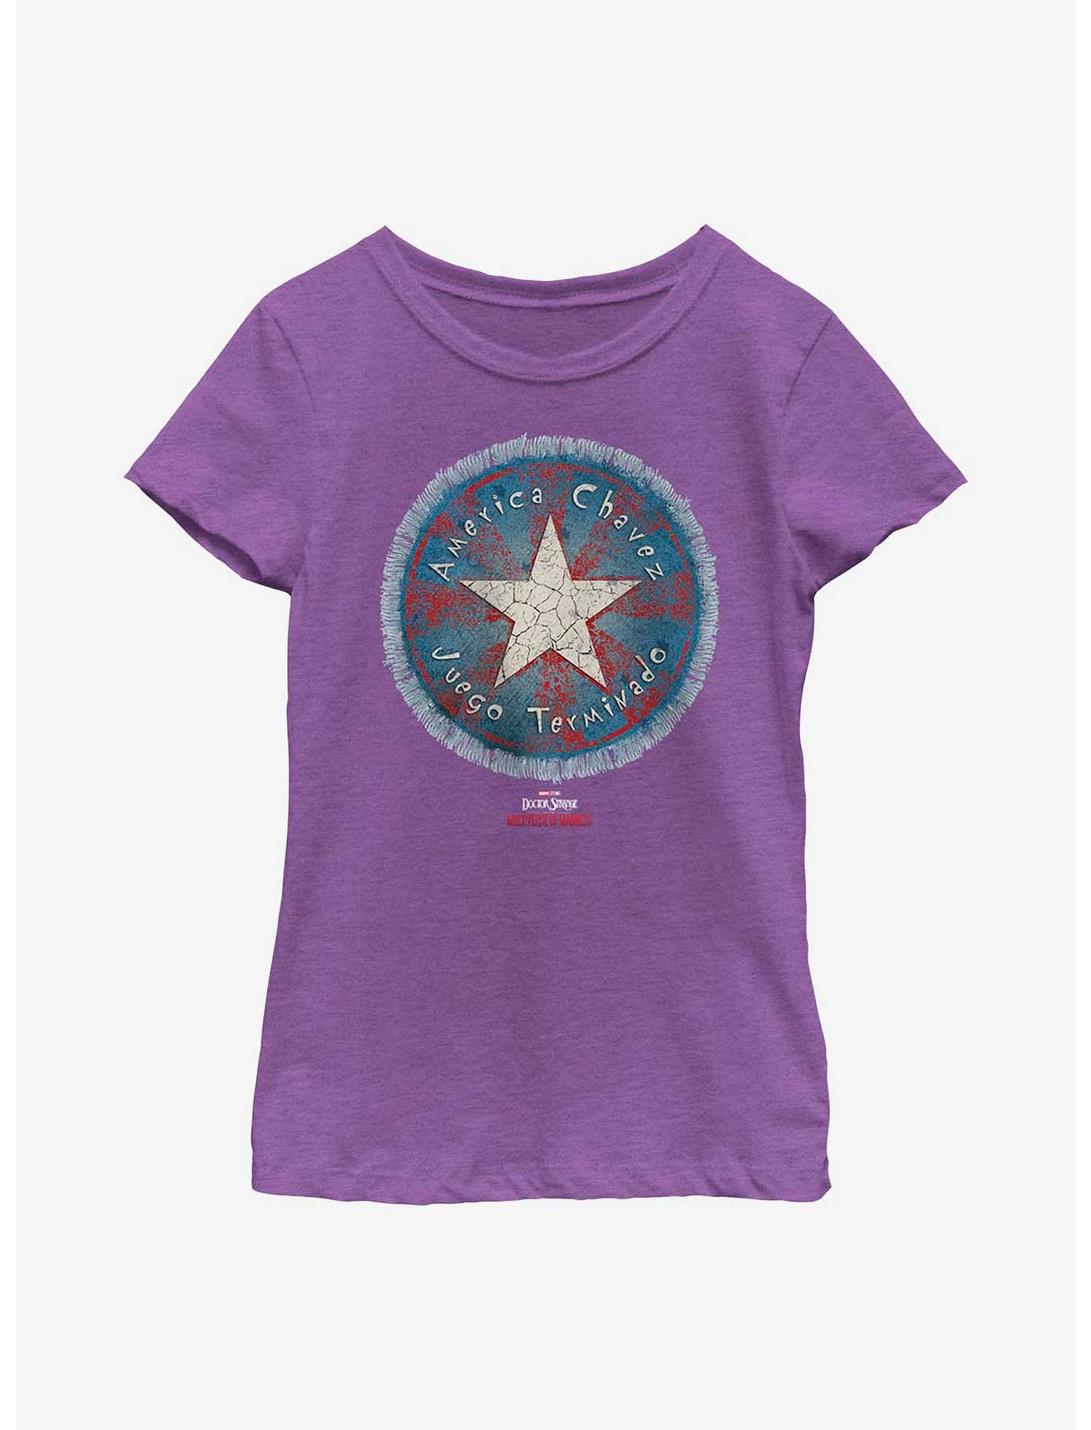 Marvel Doctor Strange In The Multiverse Of Madness America Chavez Badge Youth Girls T-Shirt, PURPLE BERRY, hi-res